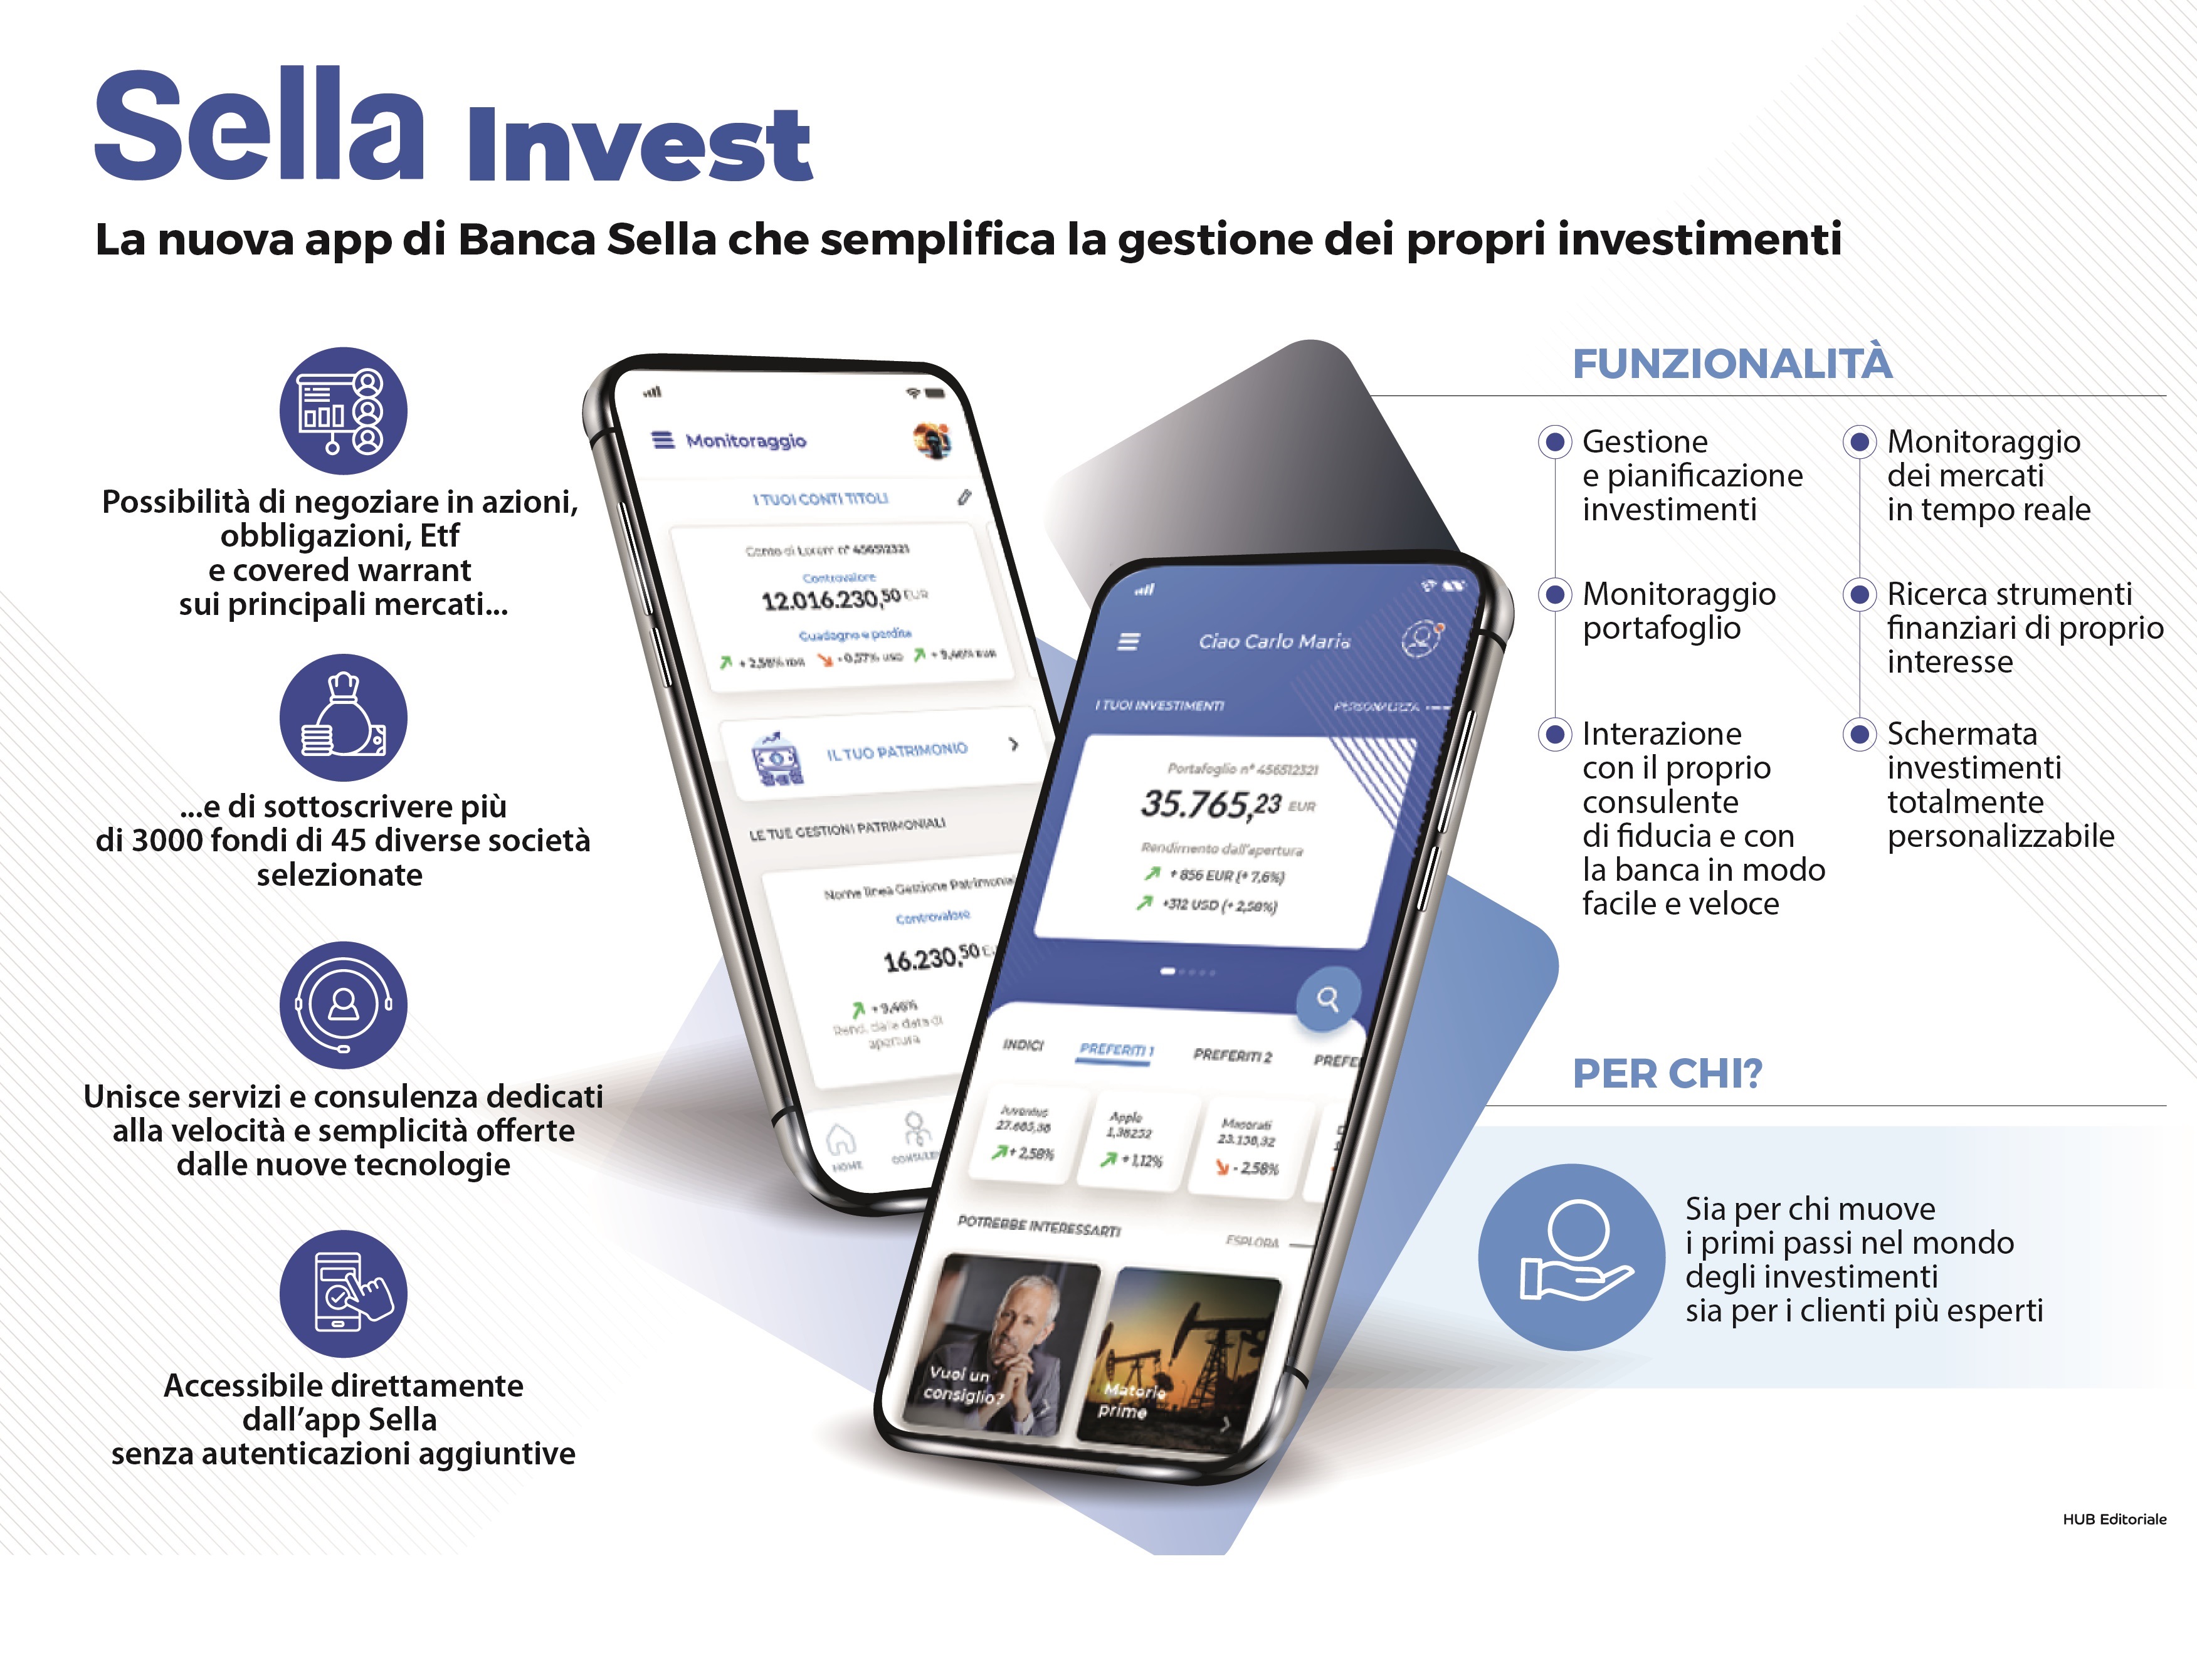 Mobile banking, Banca Sella introduces the app that streamlines investments' management